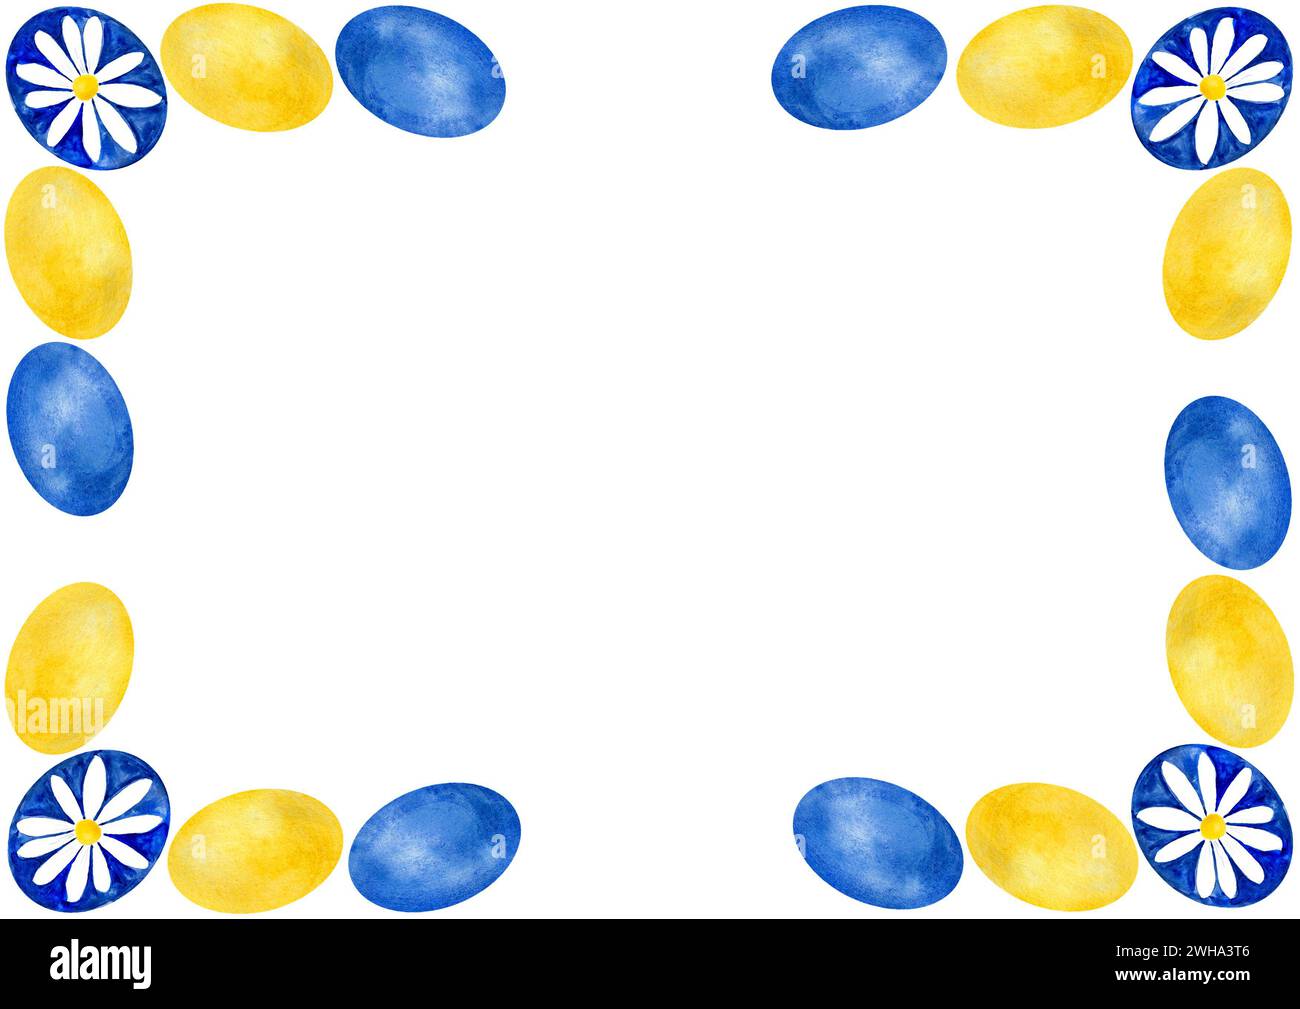 Frame of blue and yellow ovals. Dark blue ovals with daisy flowers in each corner. Daisy consists of white petals and yellow center. White background Stock Photo